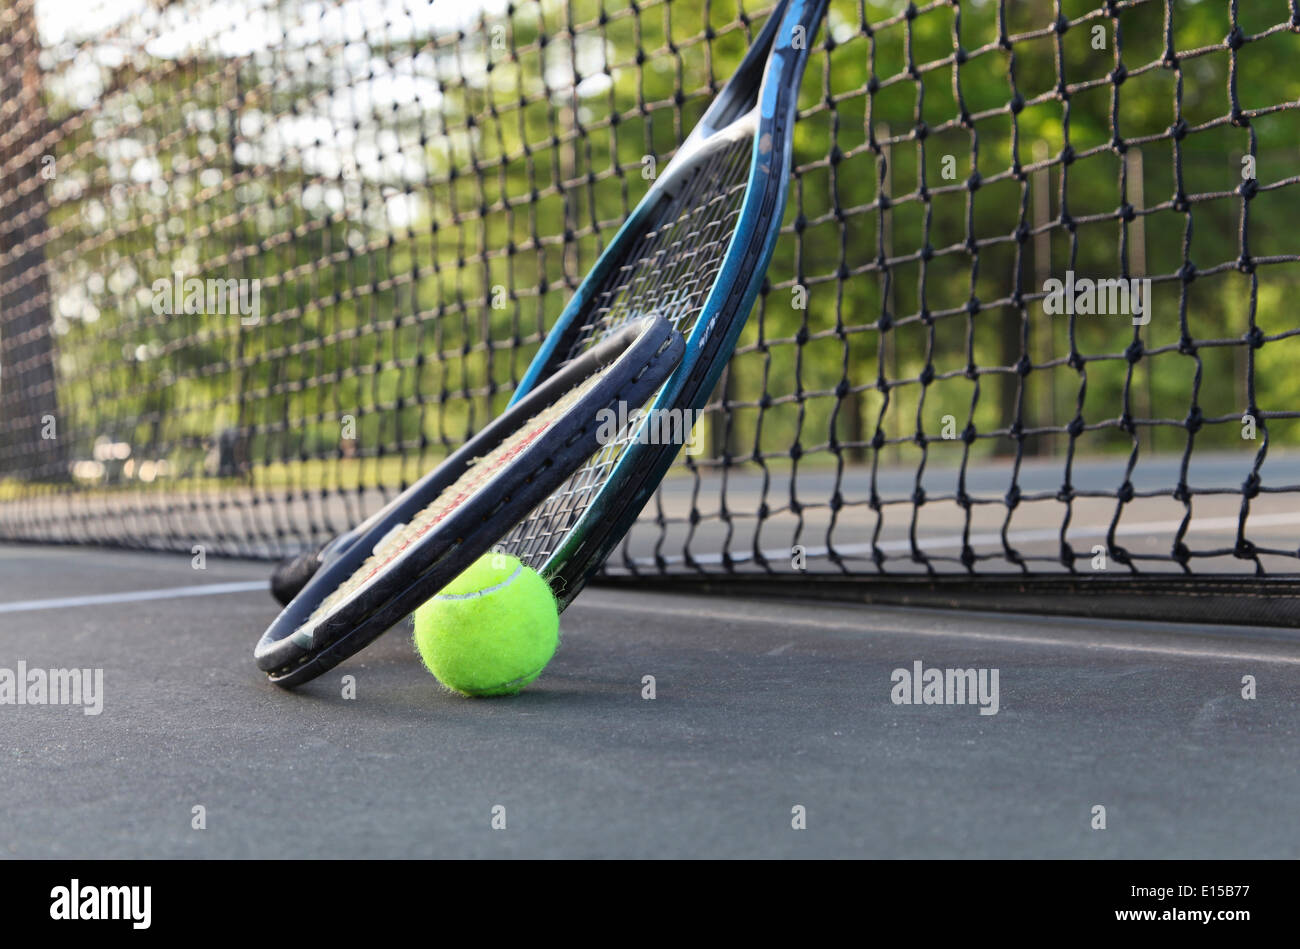 Tennis rackets, ball leaning against net. Stock Photo